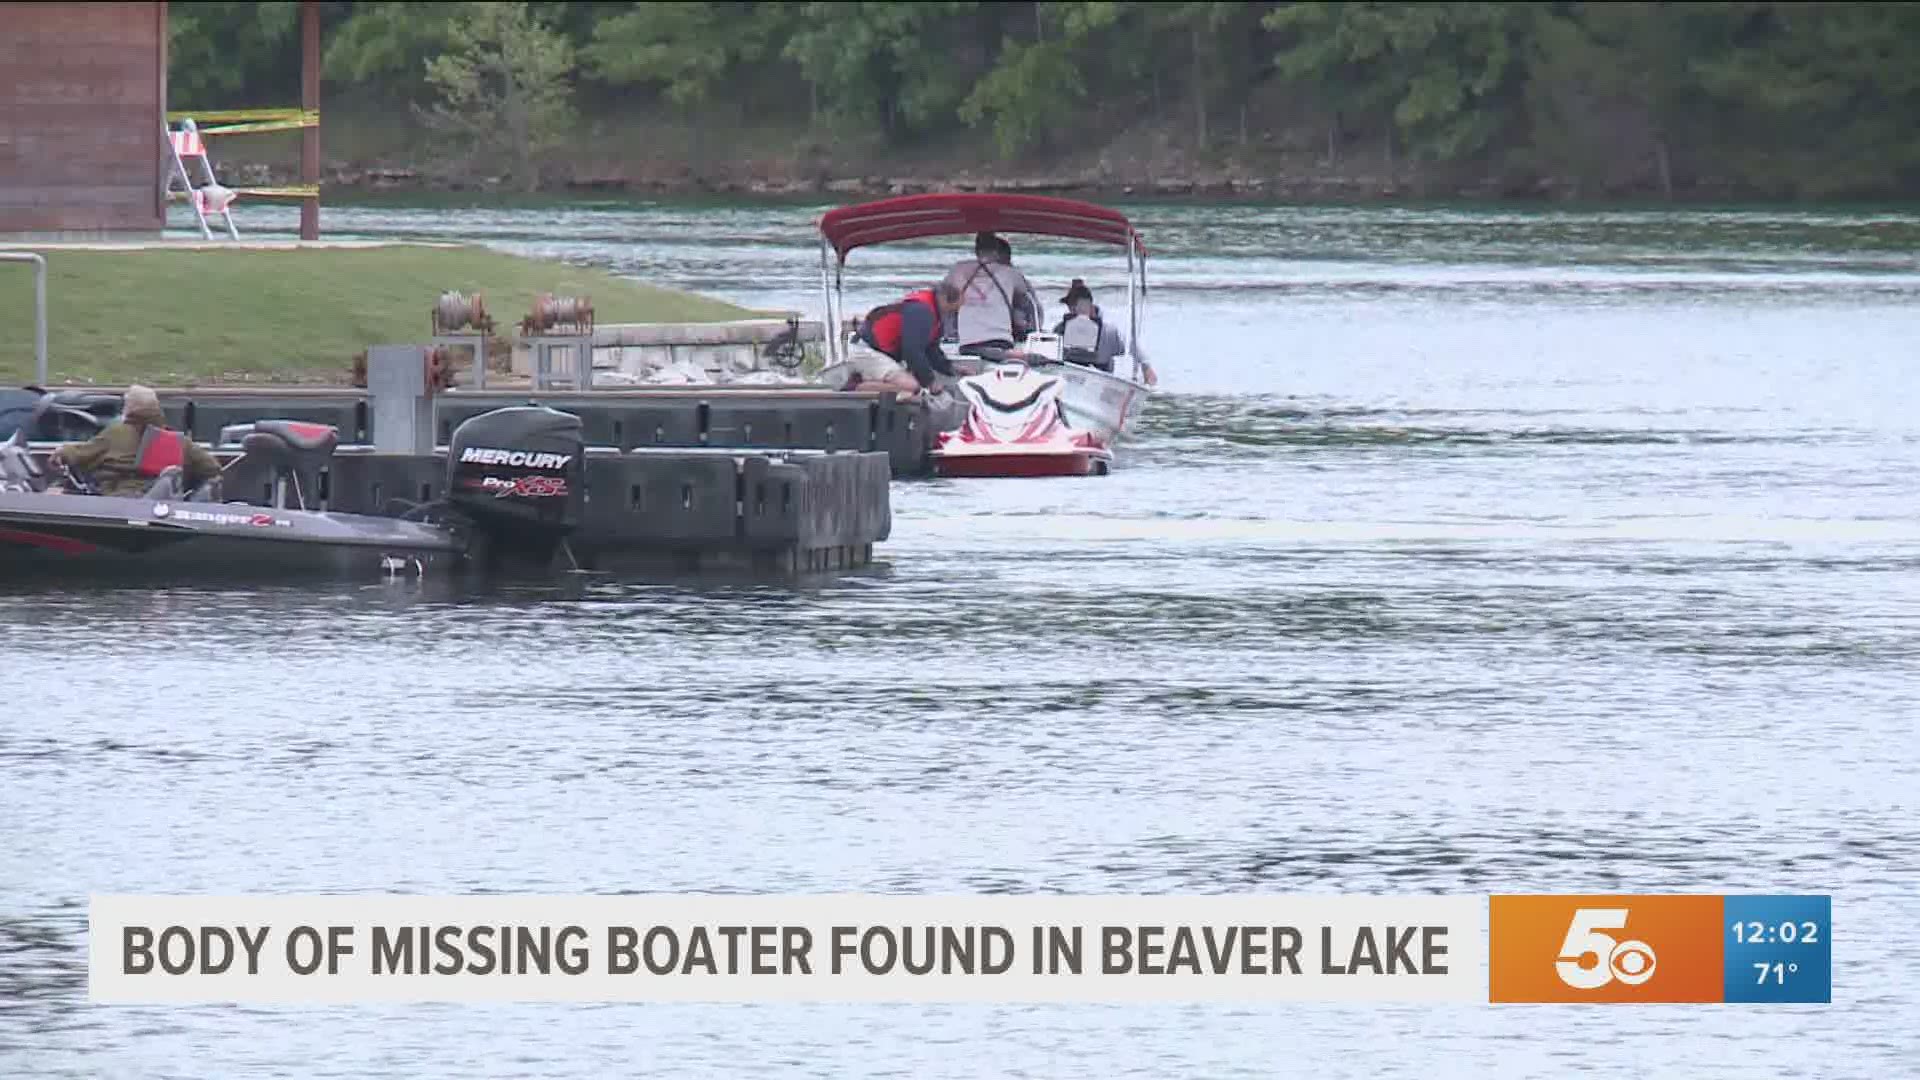 Benton County Sheriff's Office issued a press release stating that the body of missing boater, Richard Steinbeck, was recovered Tuesday morning.